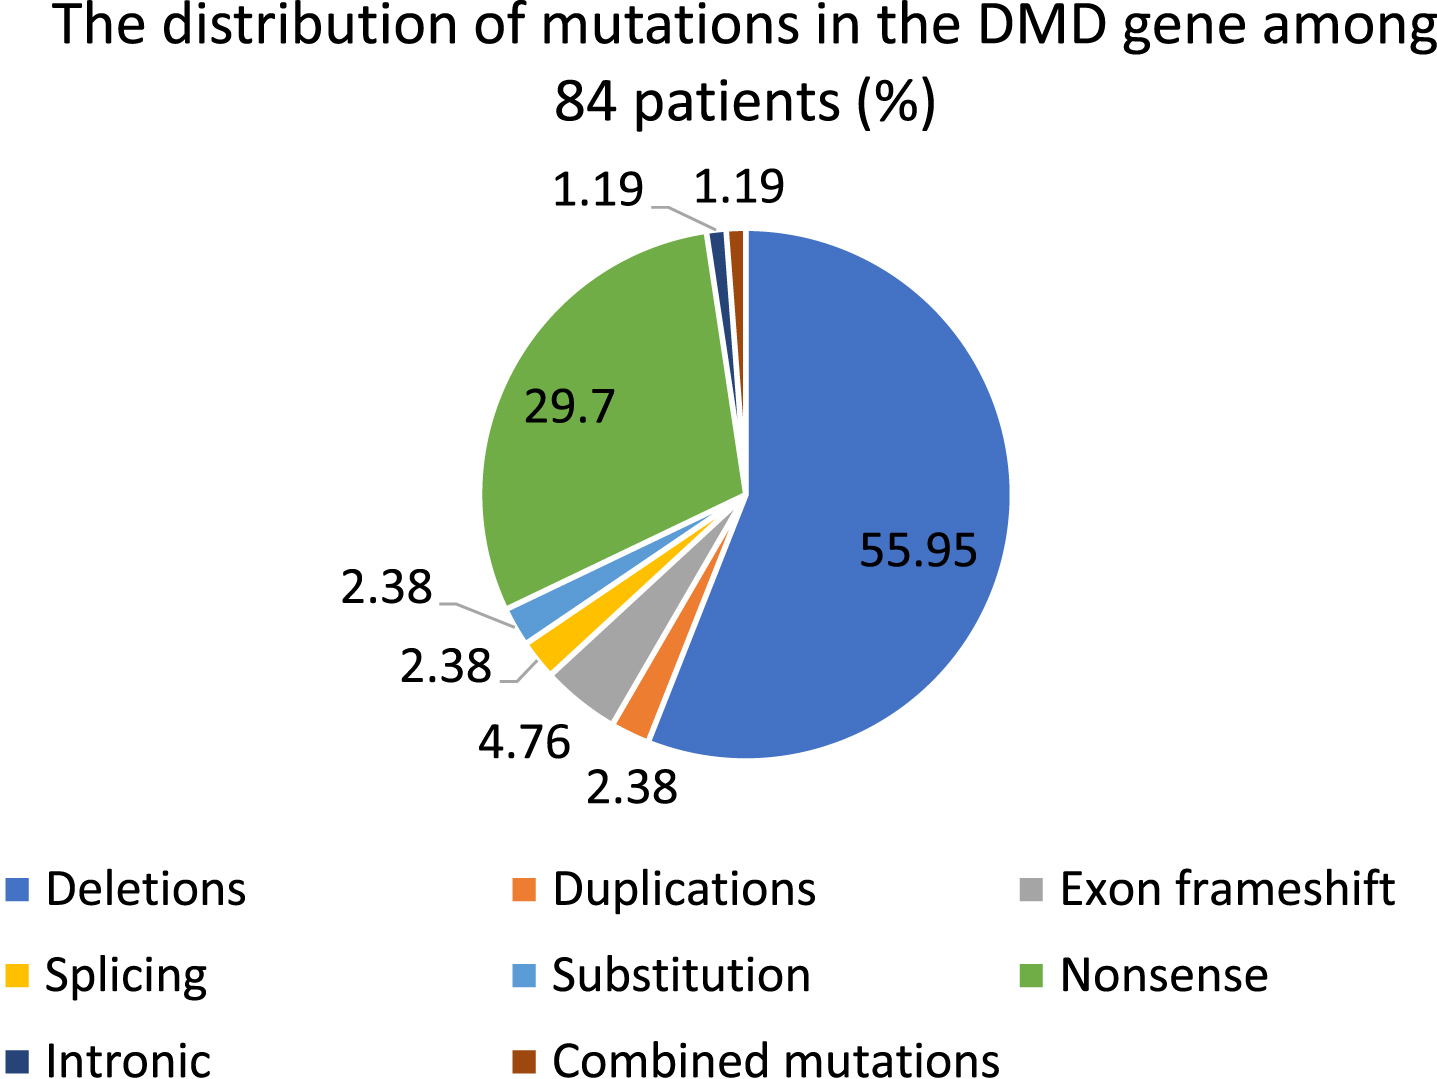 The distribution of DMD pathogenic variations among patients (total number is 84 (in %)).